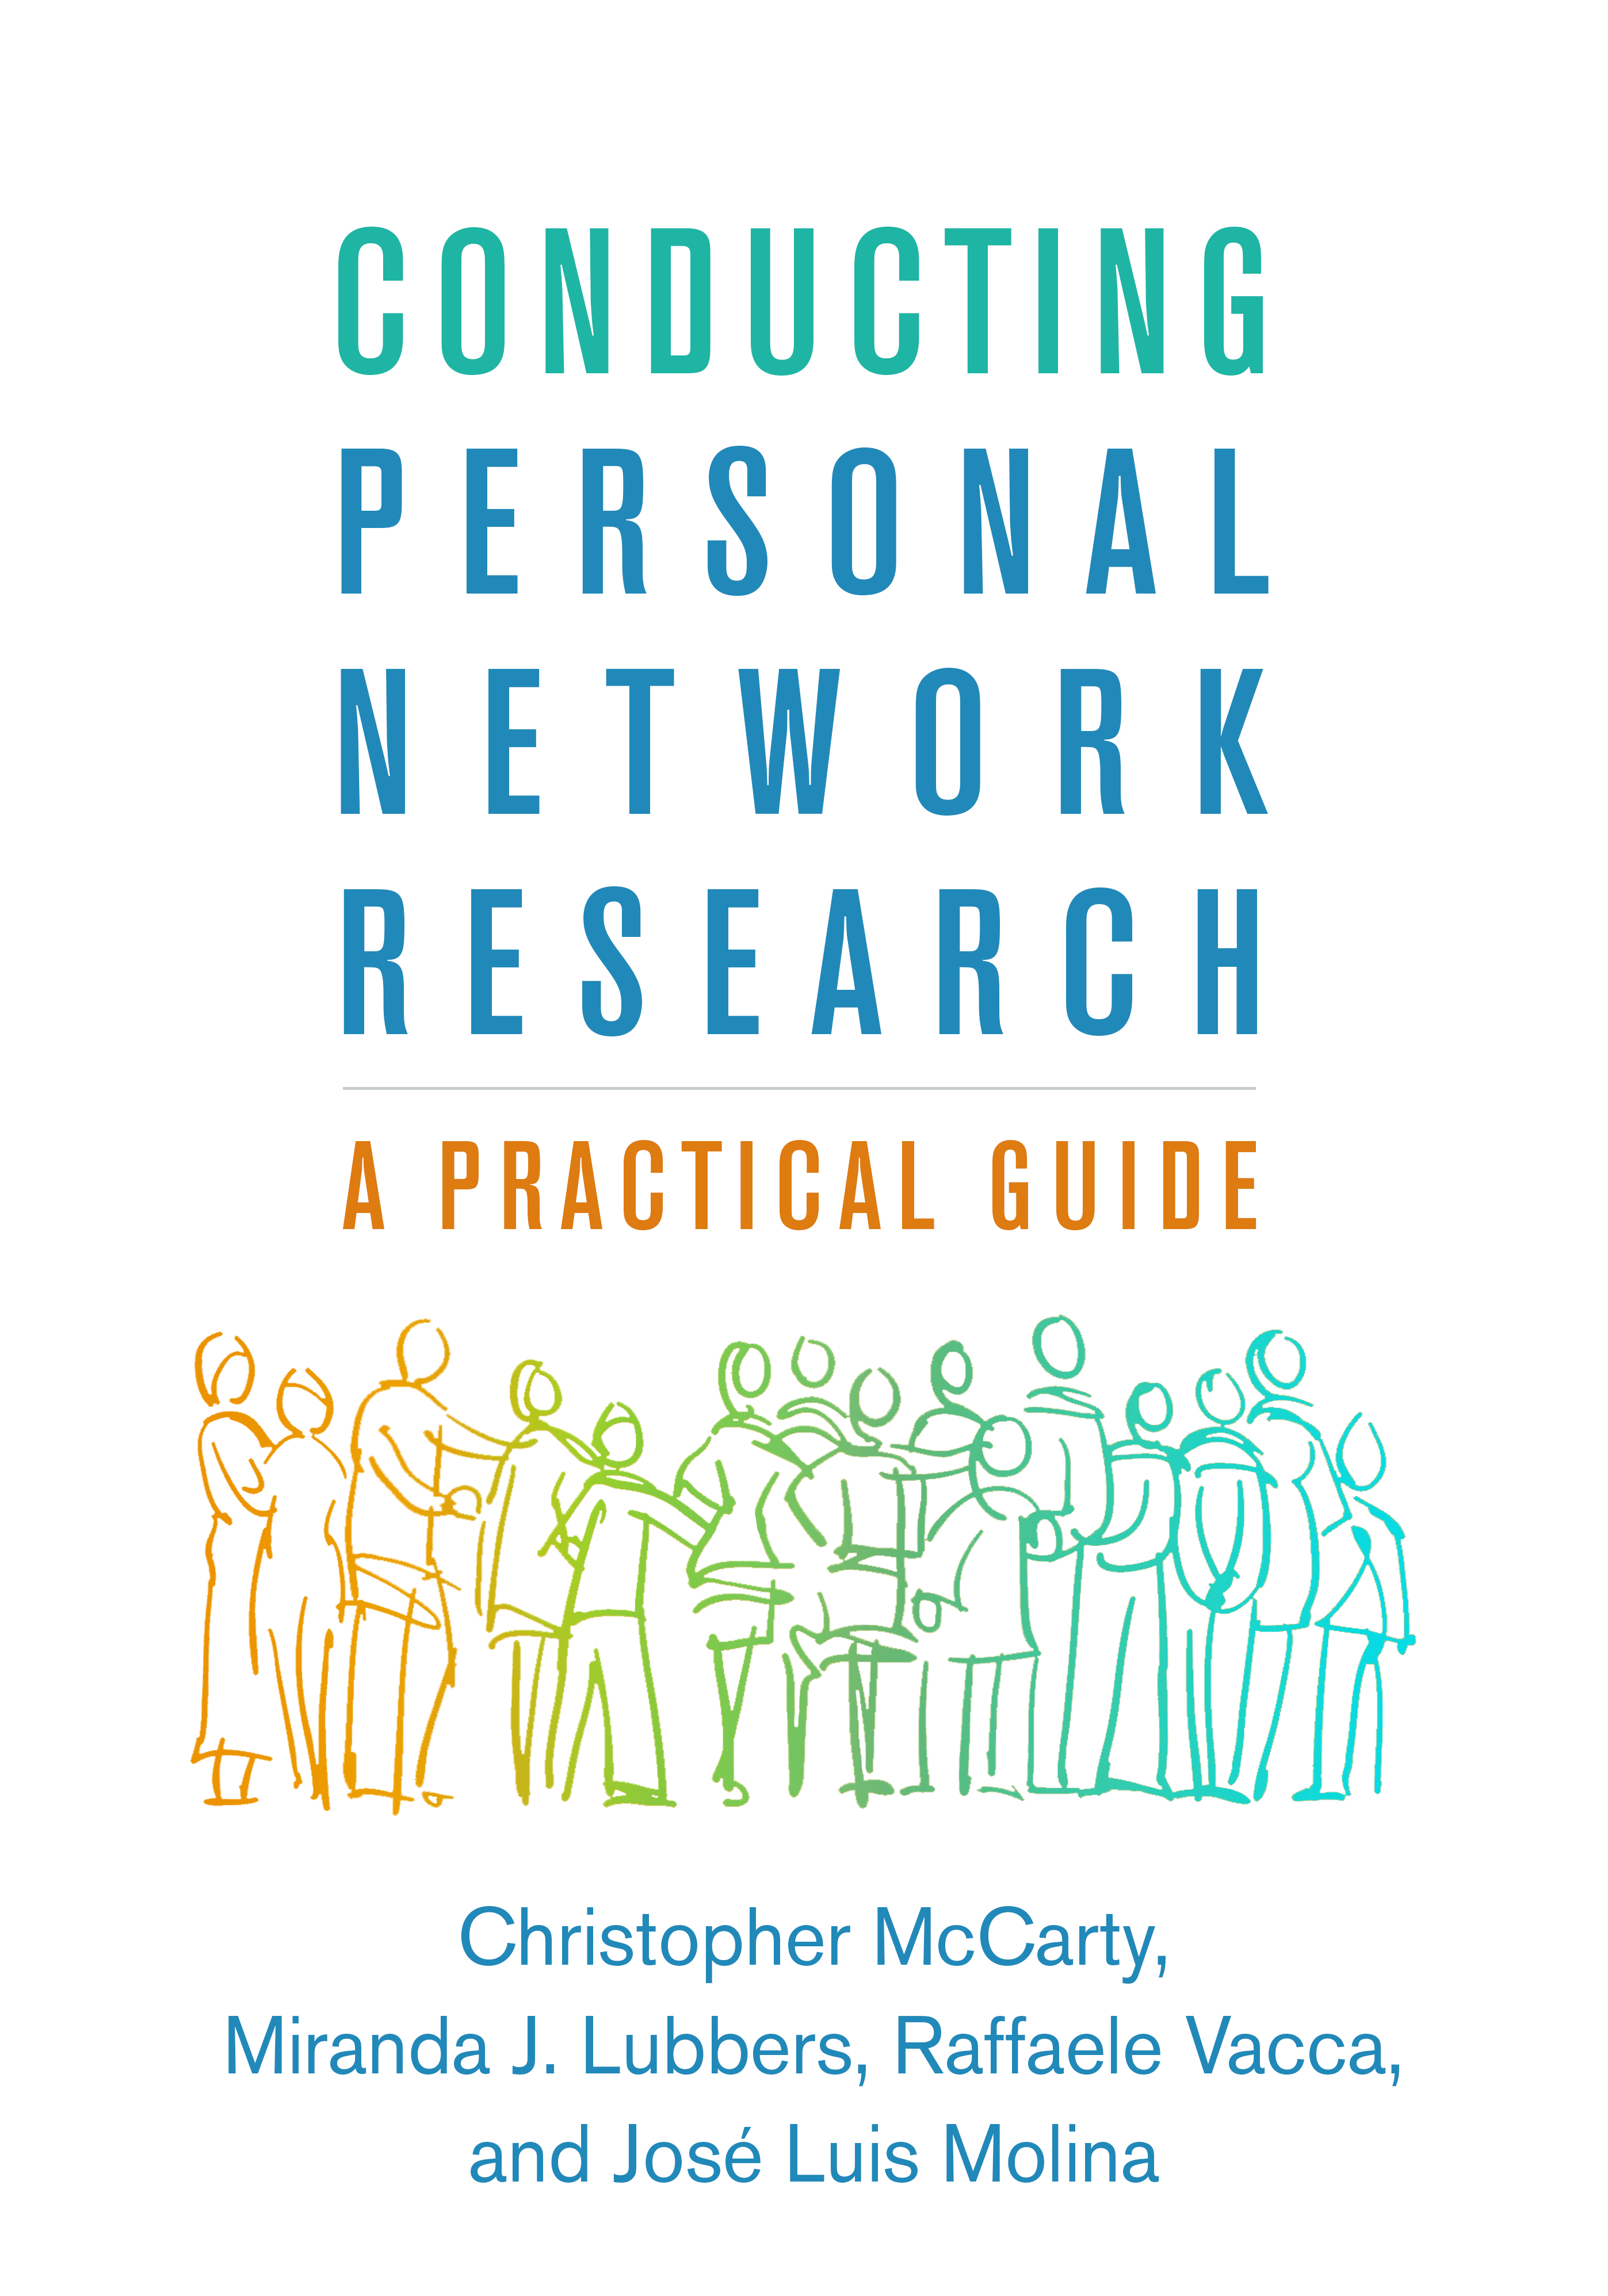 Conducting personal network research